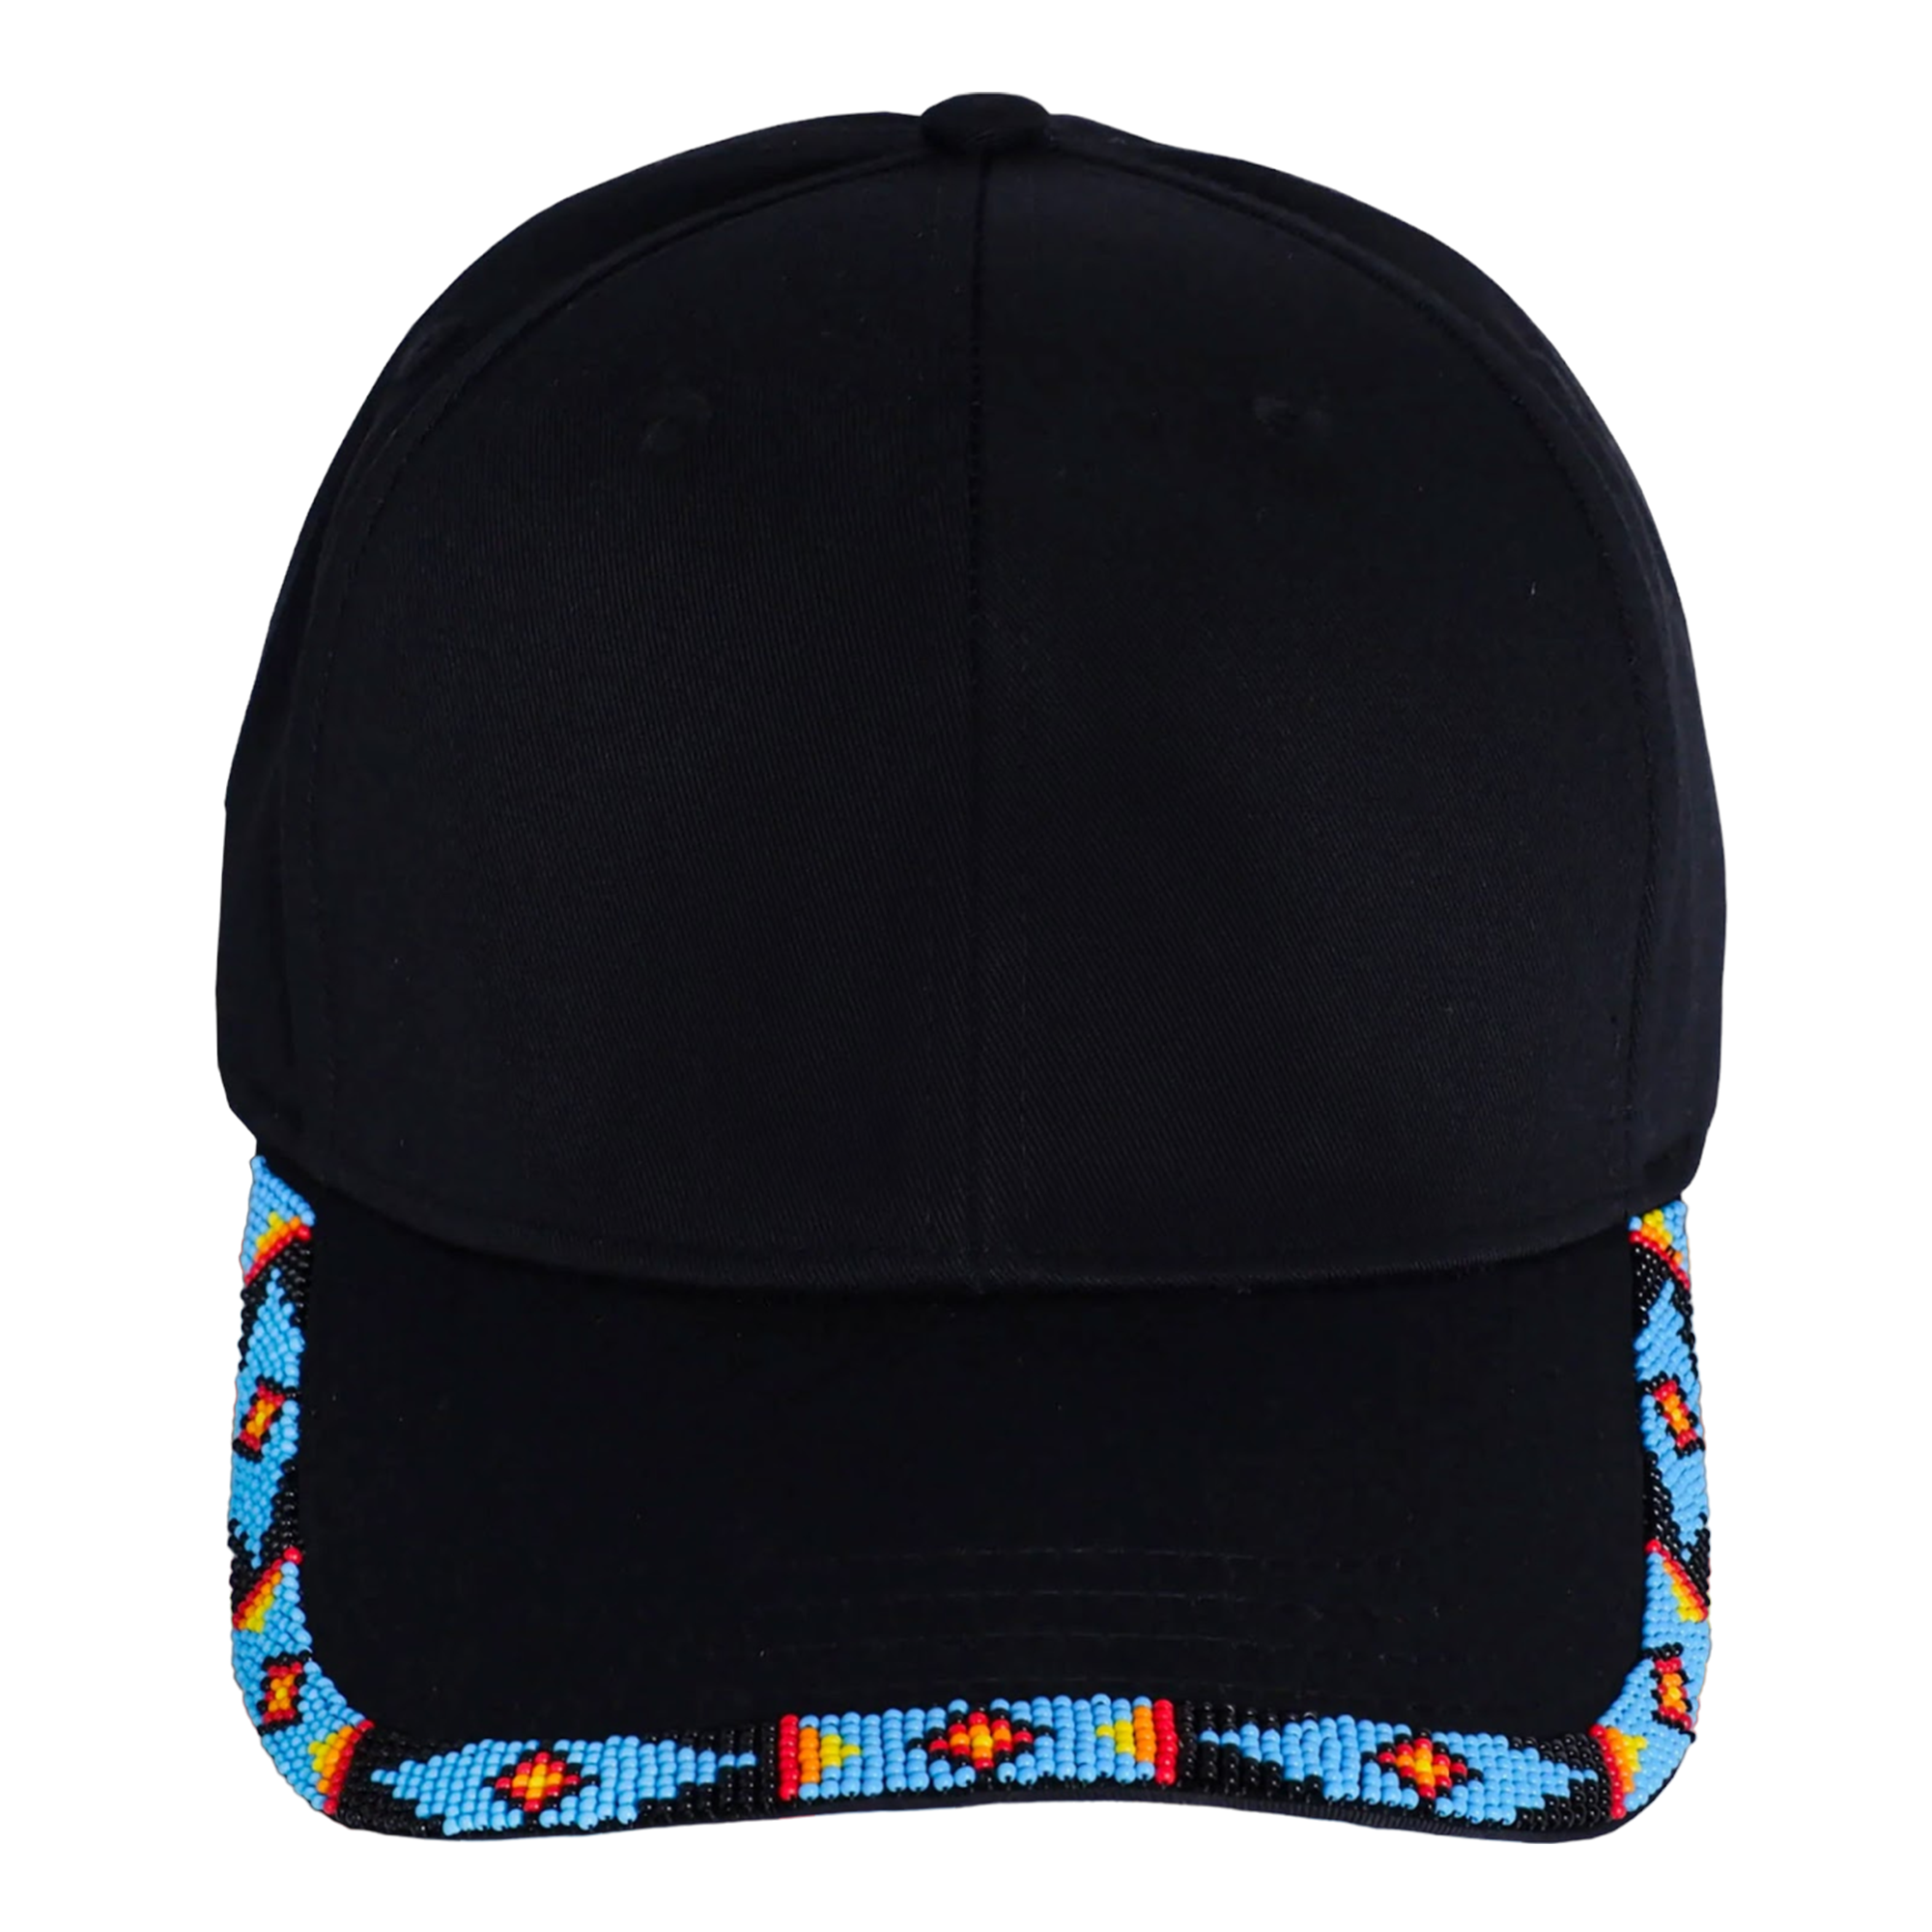 SALE 50% OFF - Baseball Cap With Colorful Beaded Brim Cotton Unisex Native American Style